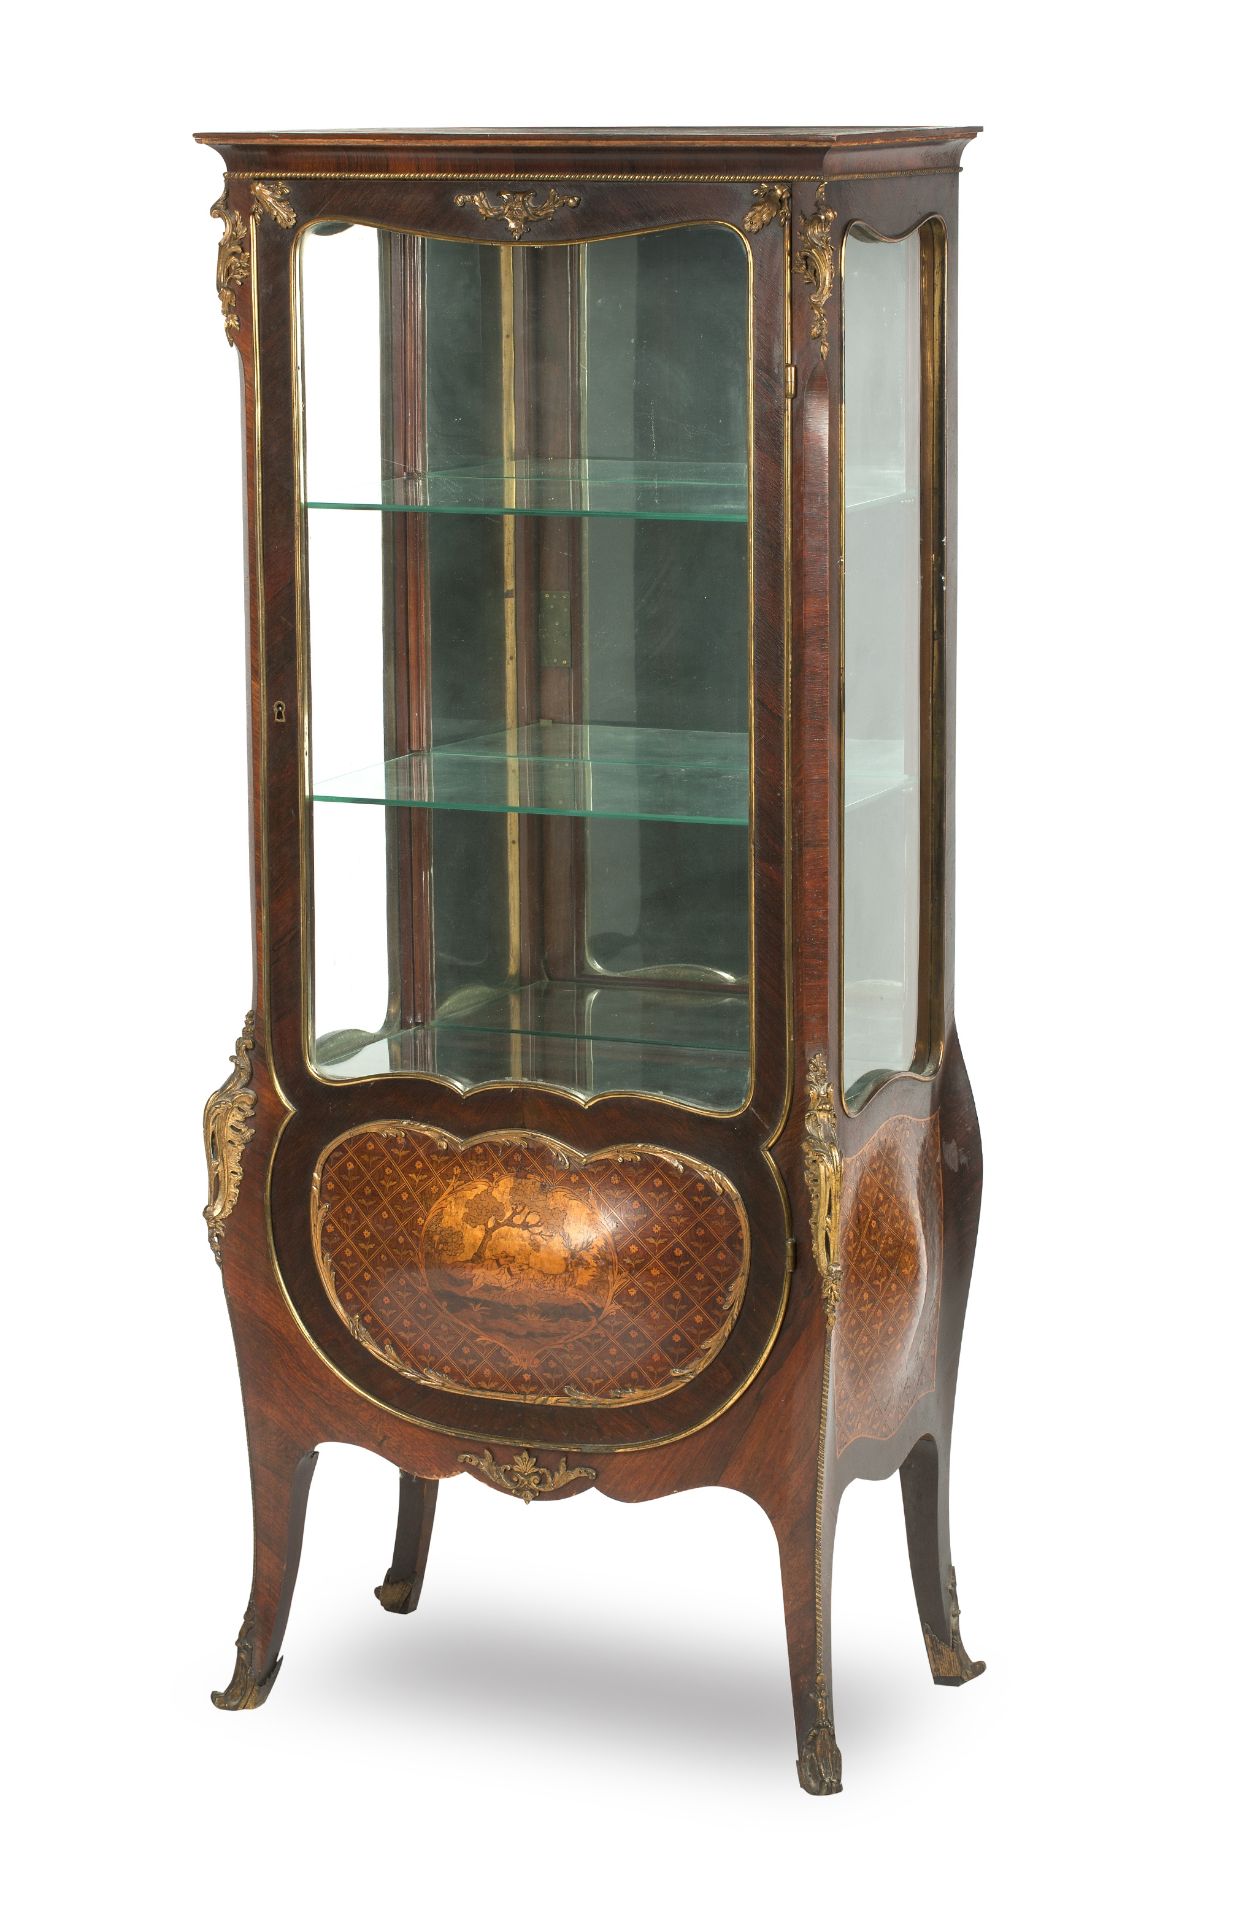 A late 19th century French walnut and marquetry inlaid vitrine